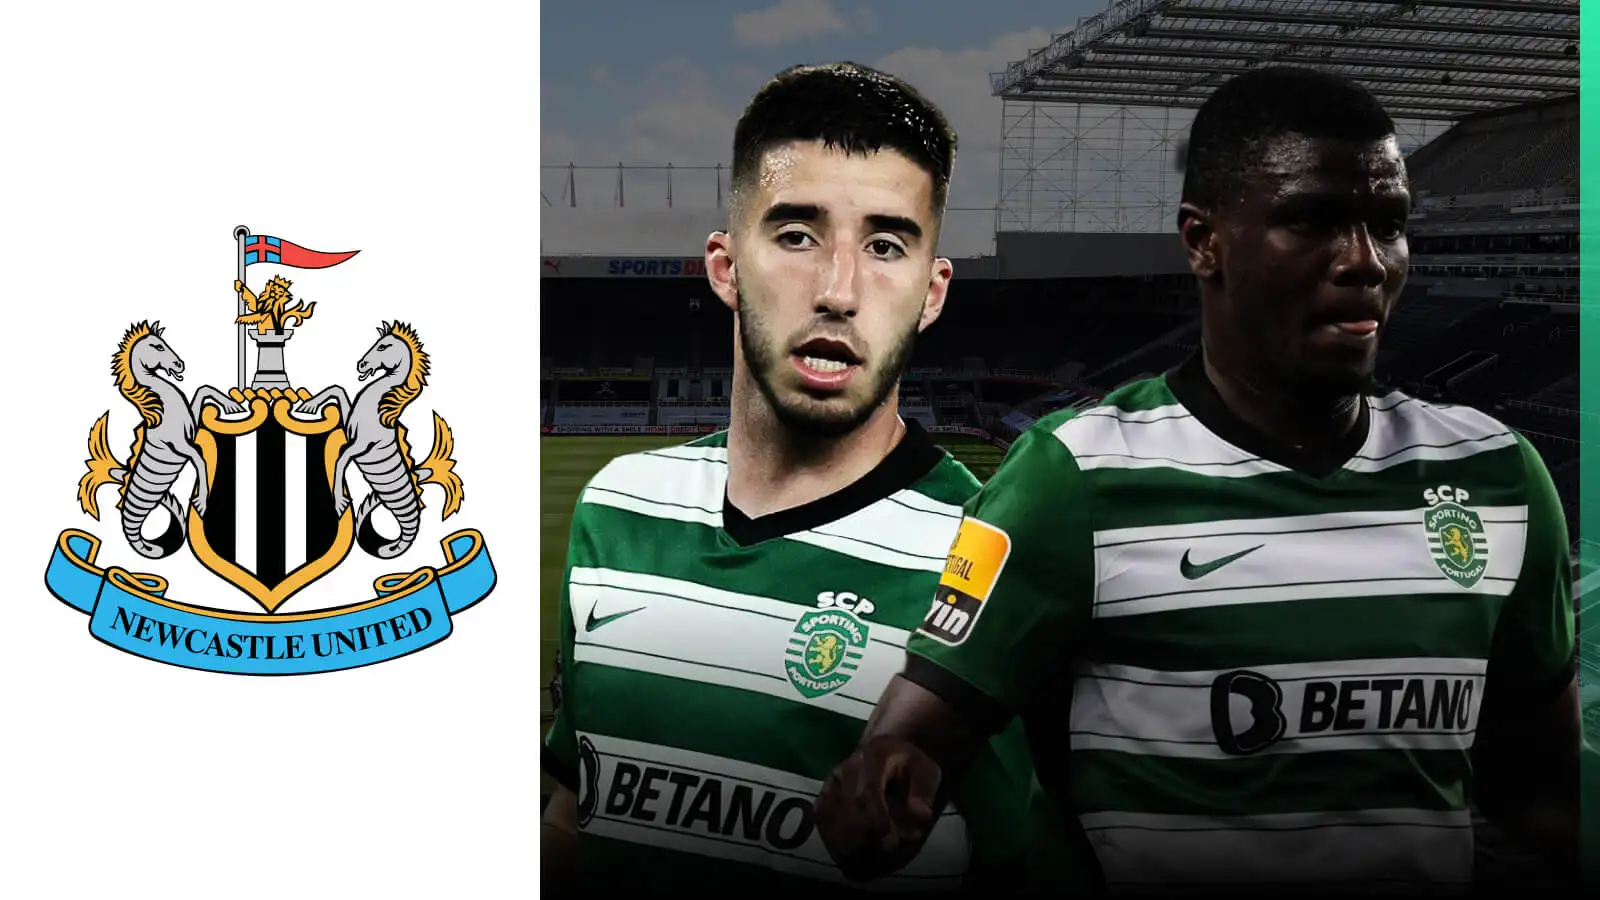 Newcastle linked Sporting Lisbon duo Goncalo Inacio and Ousmane Diomande